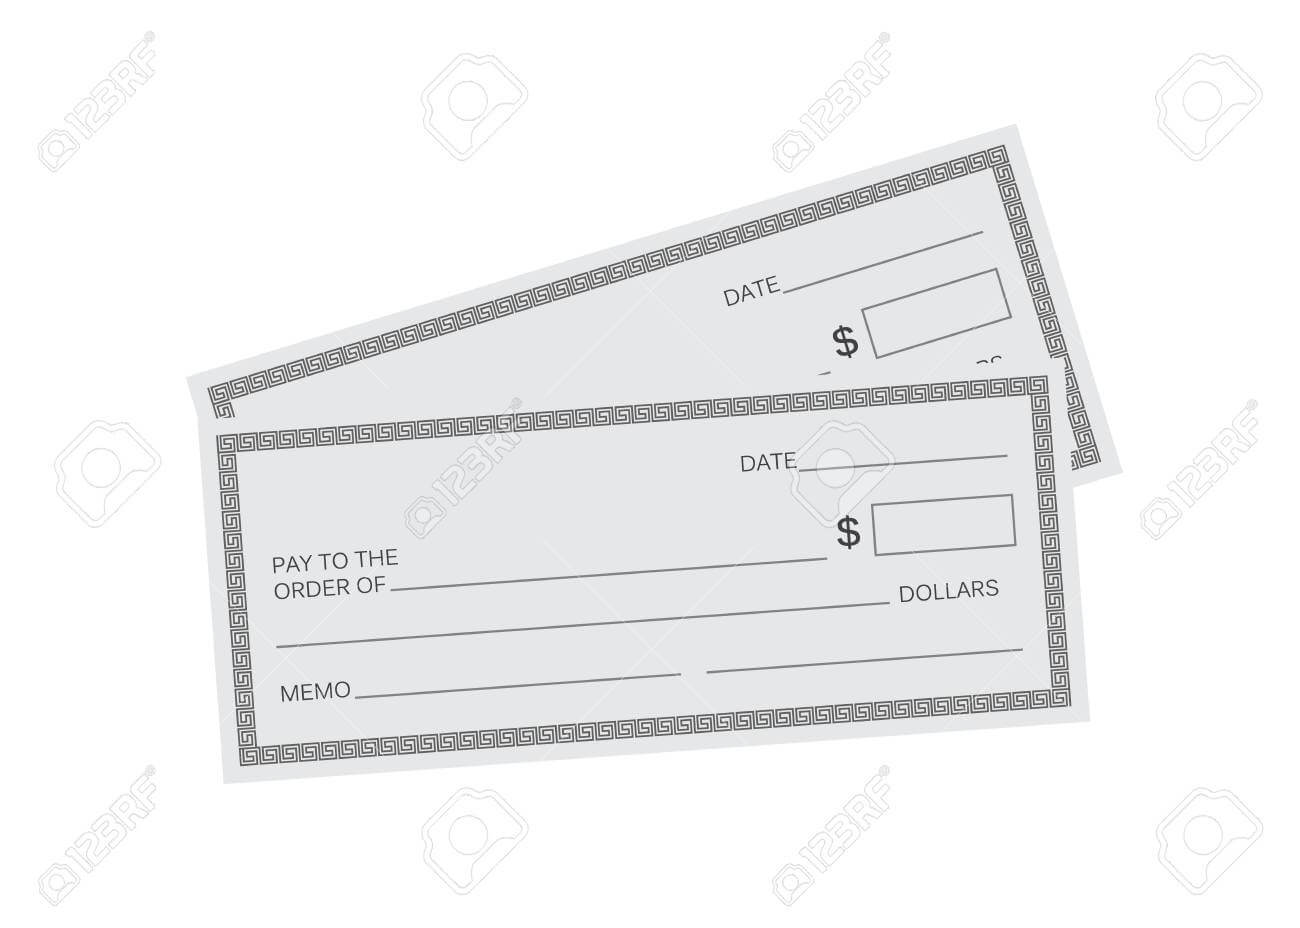 003 Free Blank Check Template Vector Banking Sensational With Editable Blank Check Template